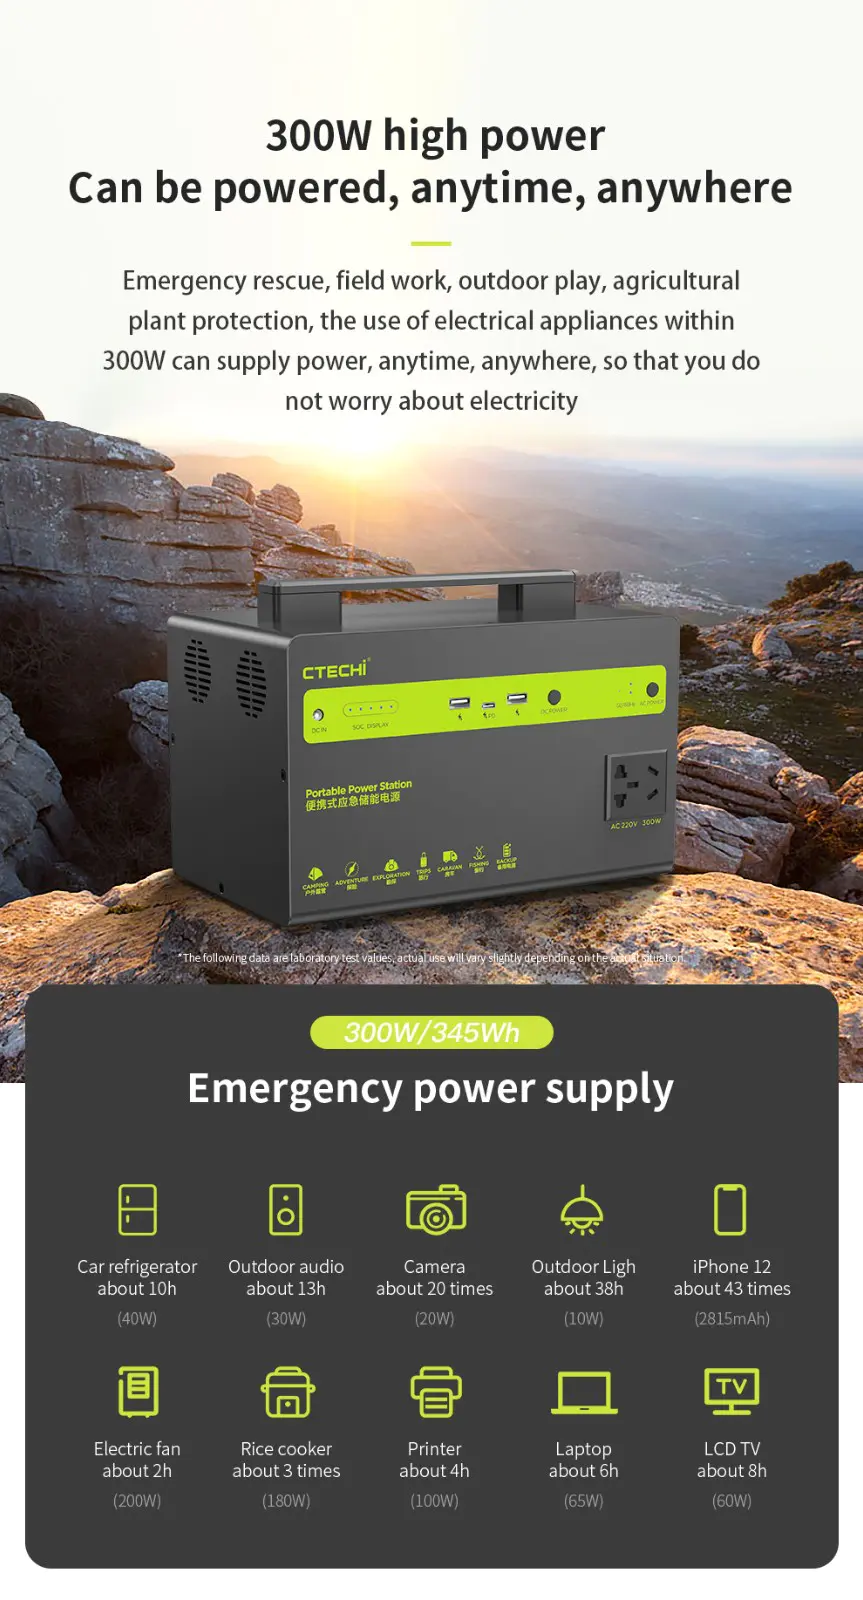 CTECHi mobile power station customized for camping